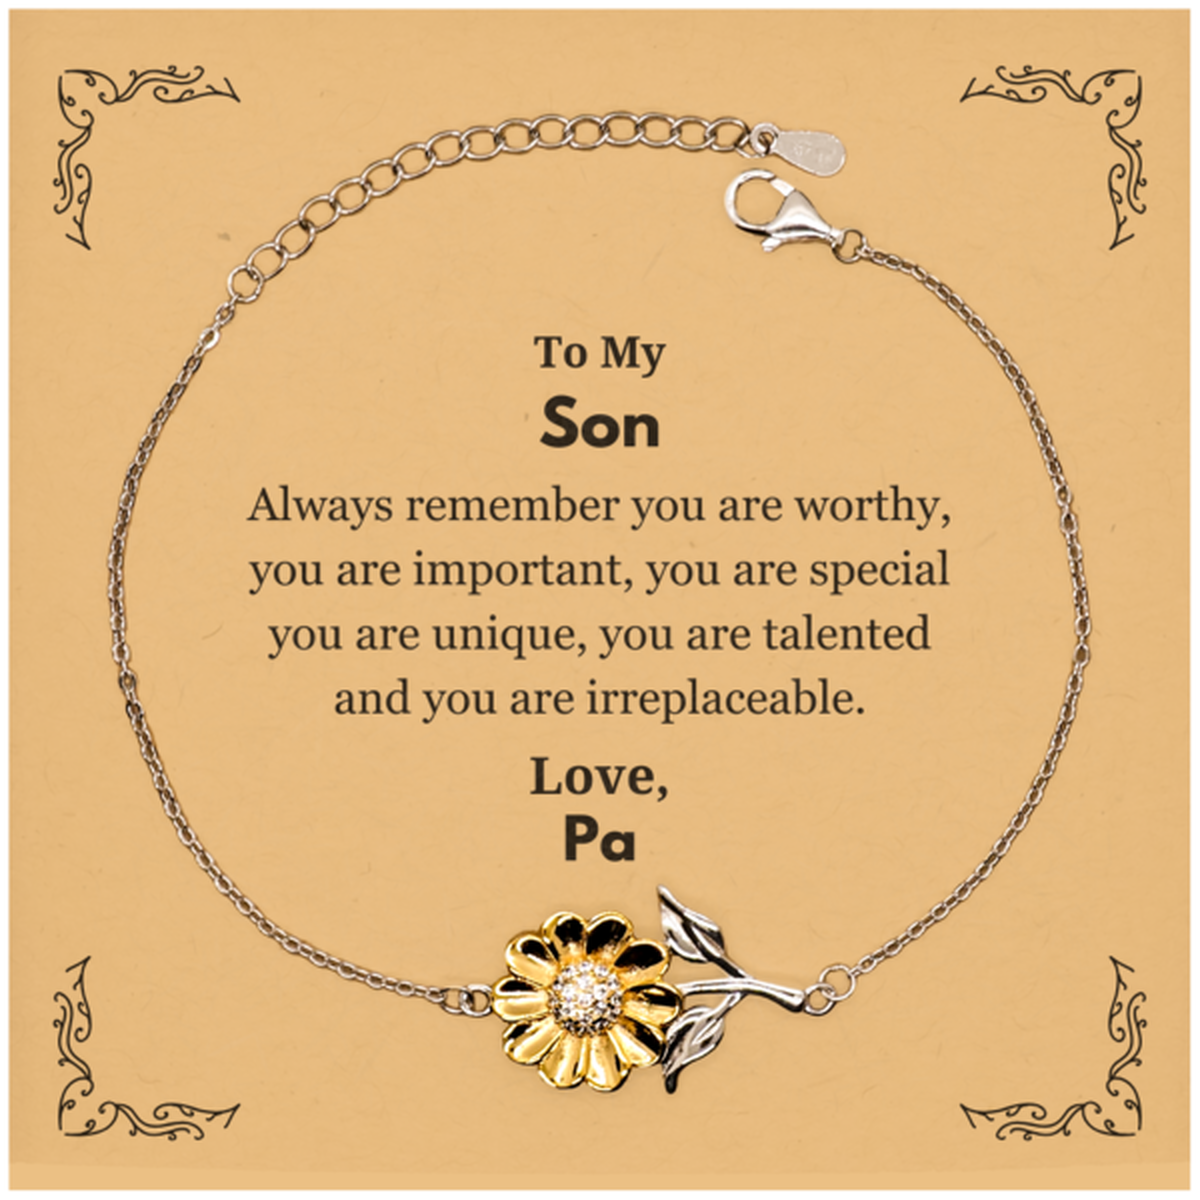 Son Birthday Gifts from Pa, Inspirational Sunflower Bracelet for Son Christmas Graduation Gifts for Son Always remember you are worthy, you are important. Love, Pa